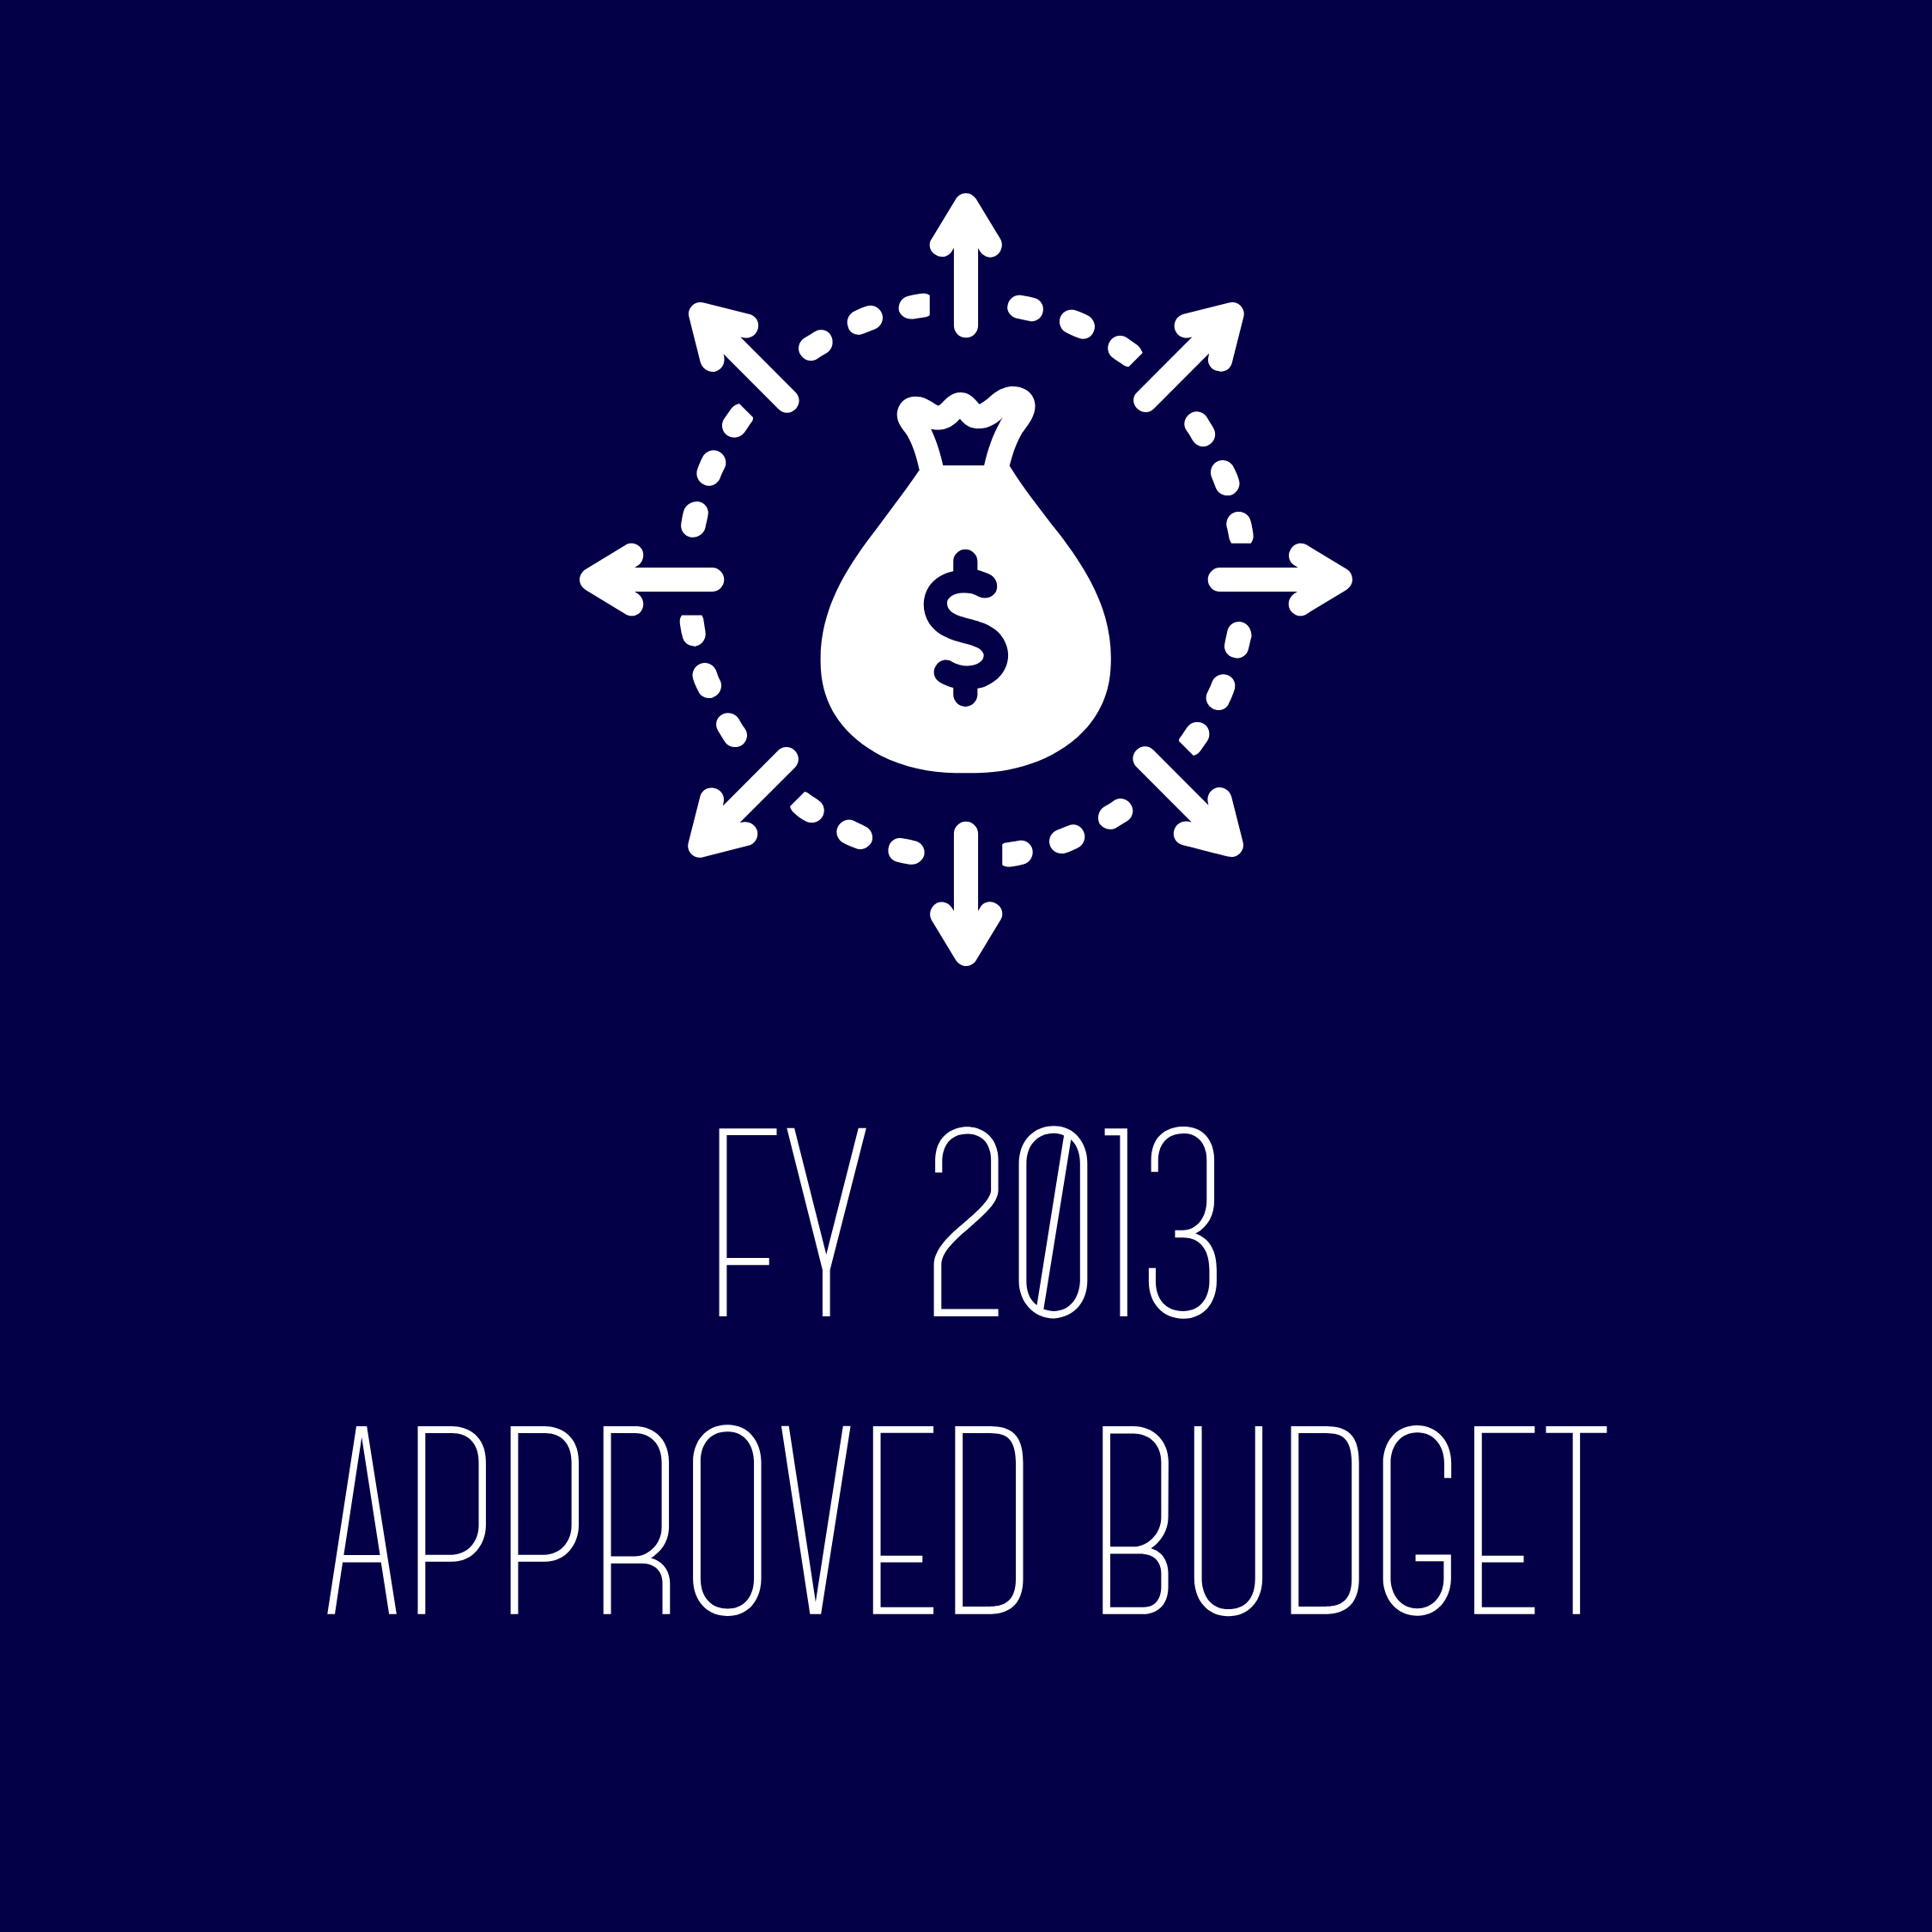 FY 2013 Approved Budget